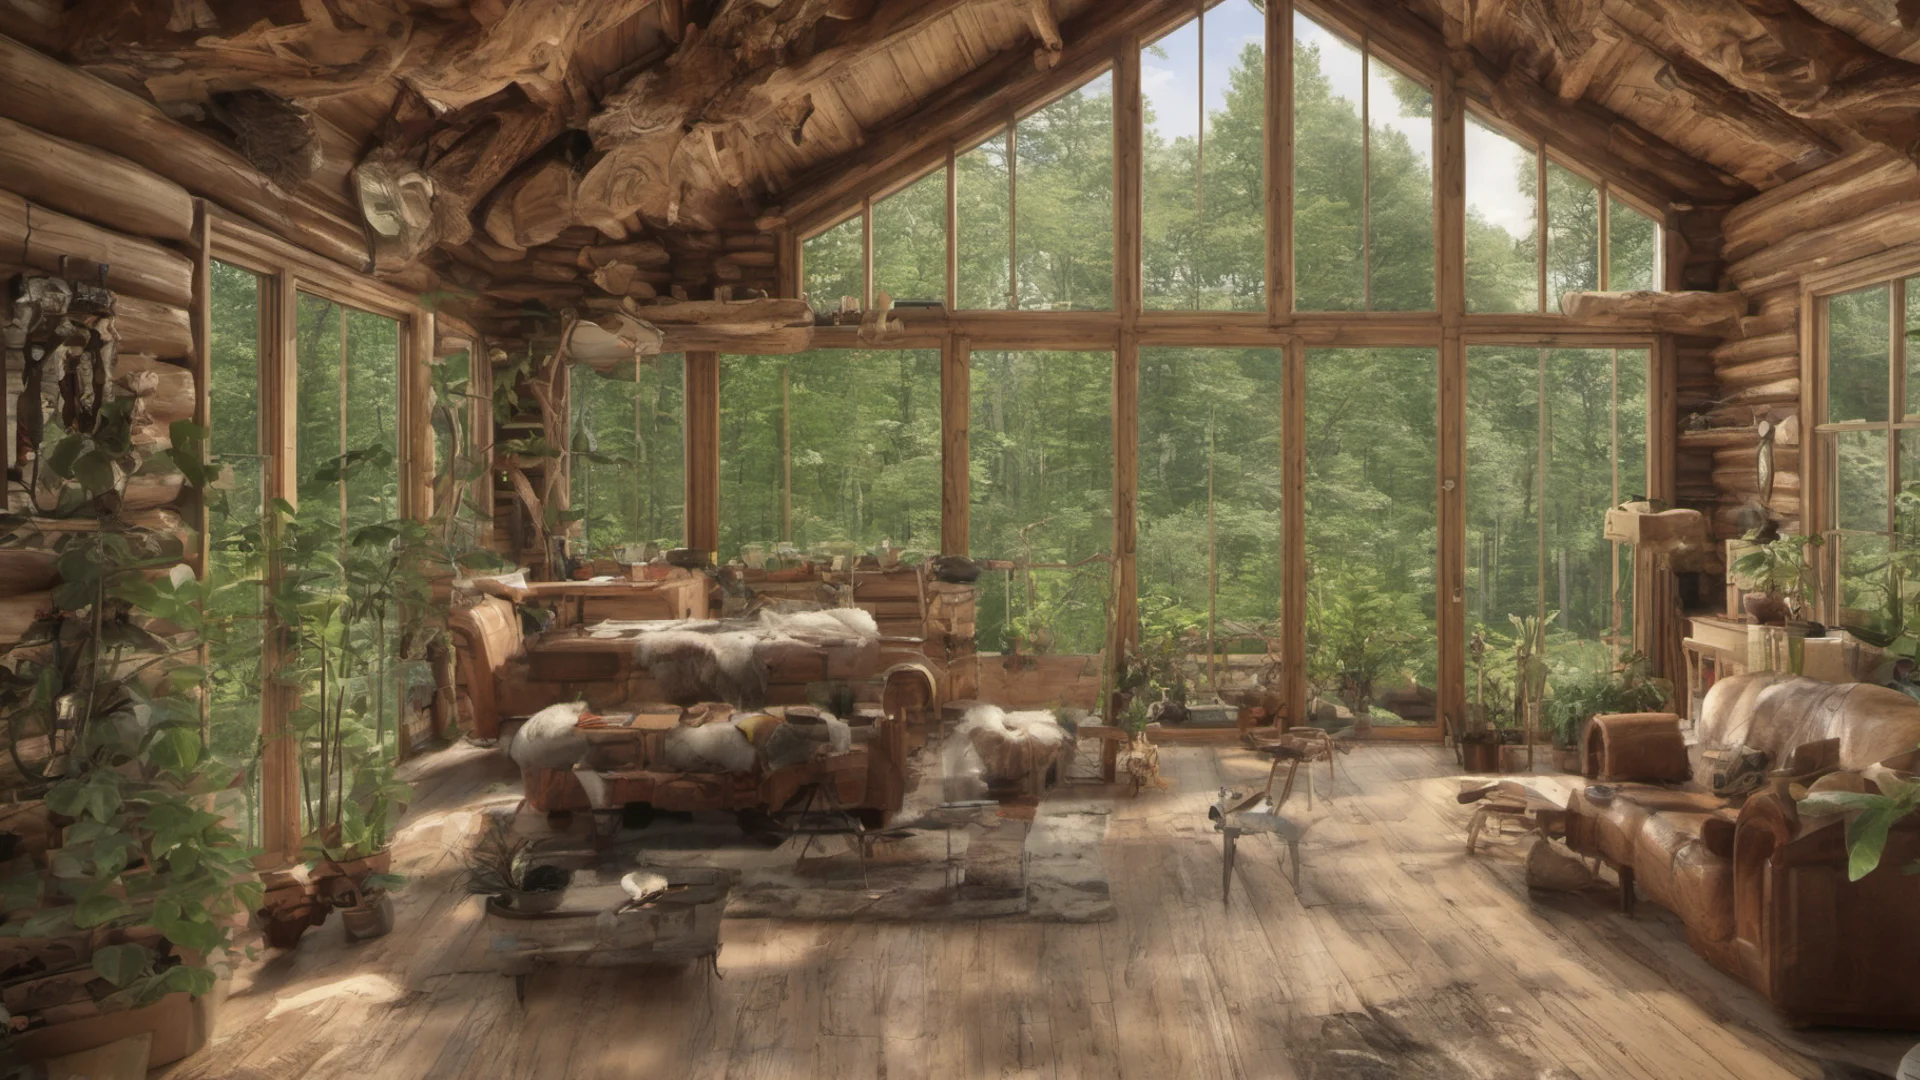 ailog cabin interior with many plants and large windows looking into a forest amazing awesome portrait 2 wide